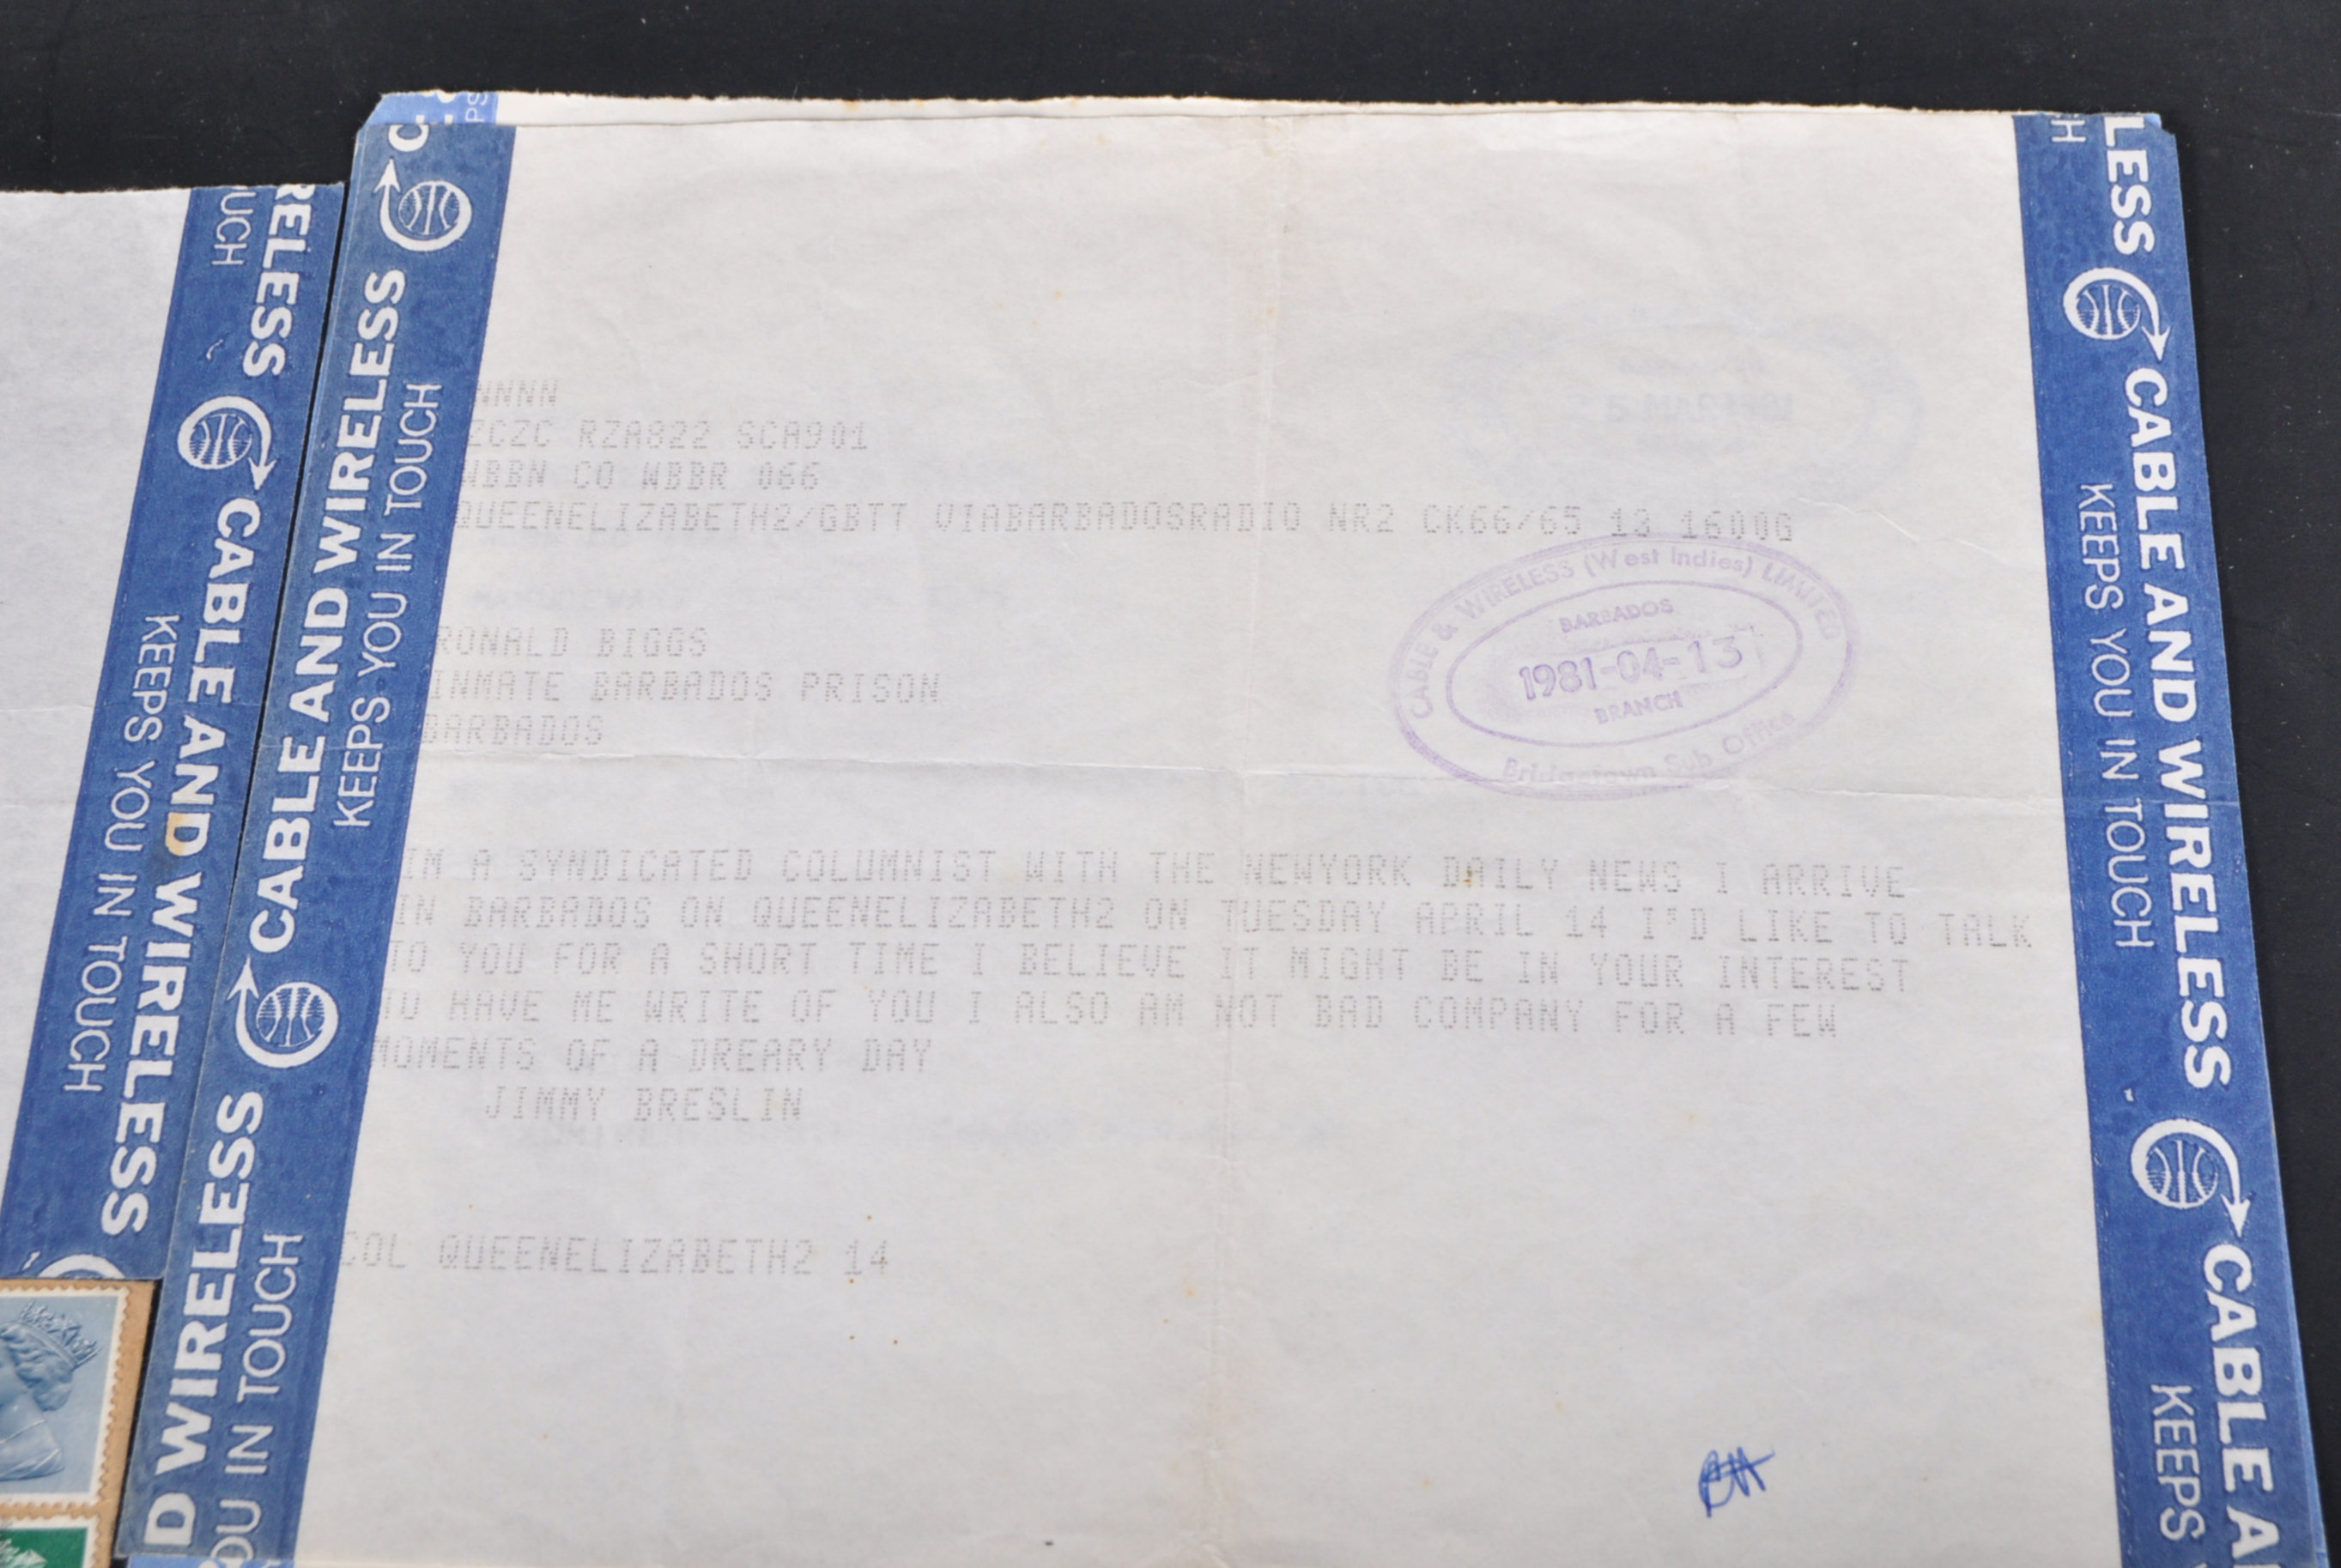 GREAT TRAIN ROBBERY - RONNIE BIGGS CORRESPONDENCE - Image 3 of 5